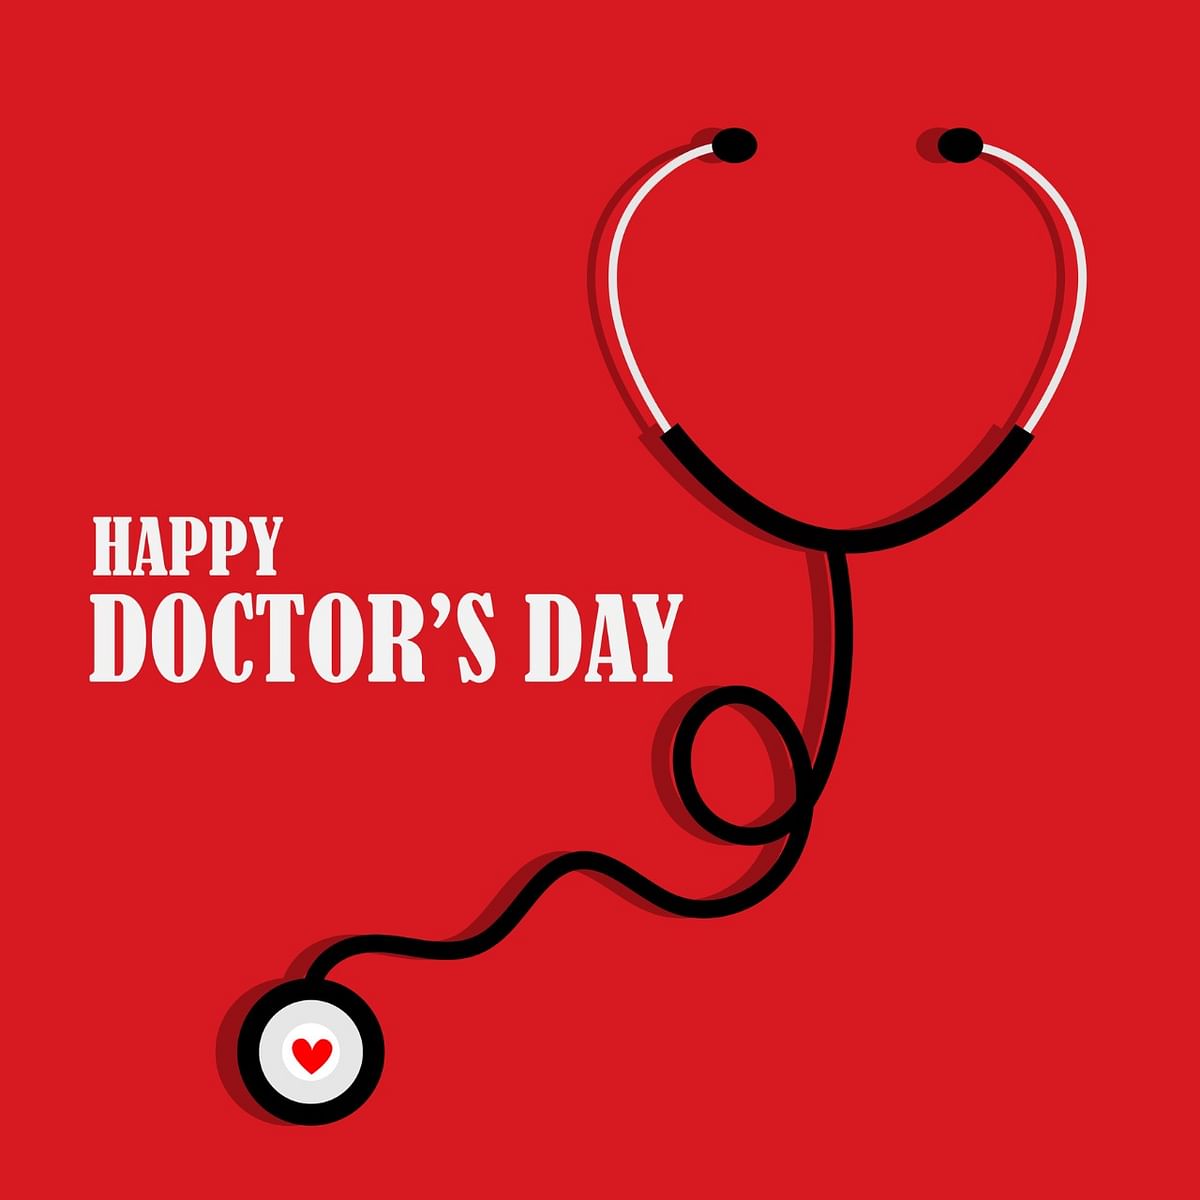 National Doctor's Day is observed every year in India to pay tribute to Dr Bidhan Chandra Roy.